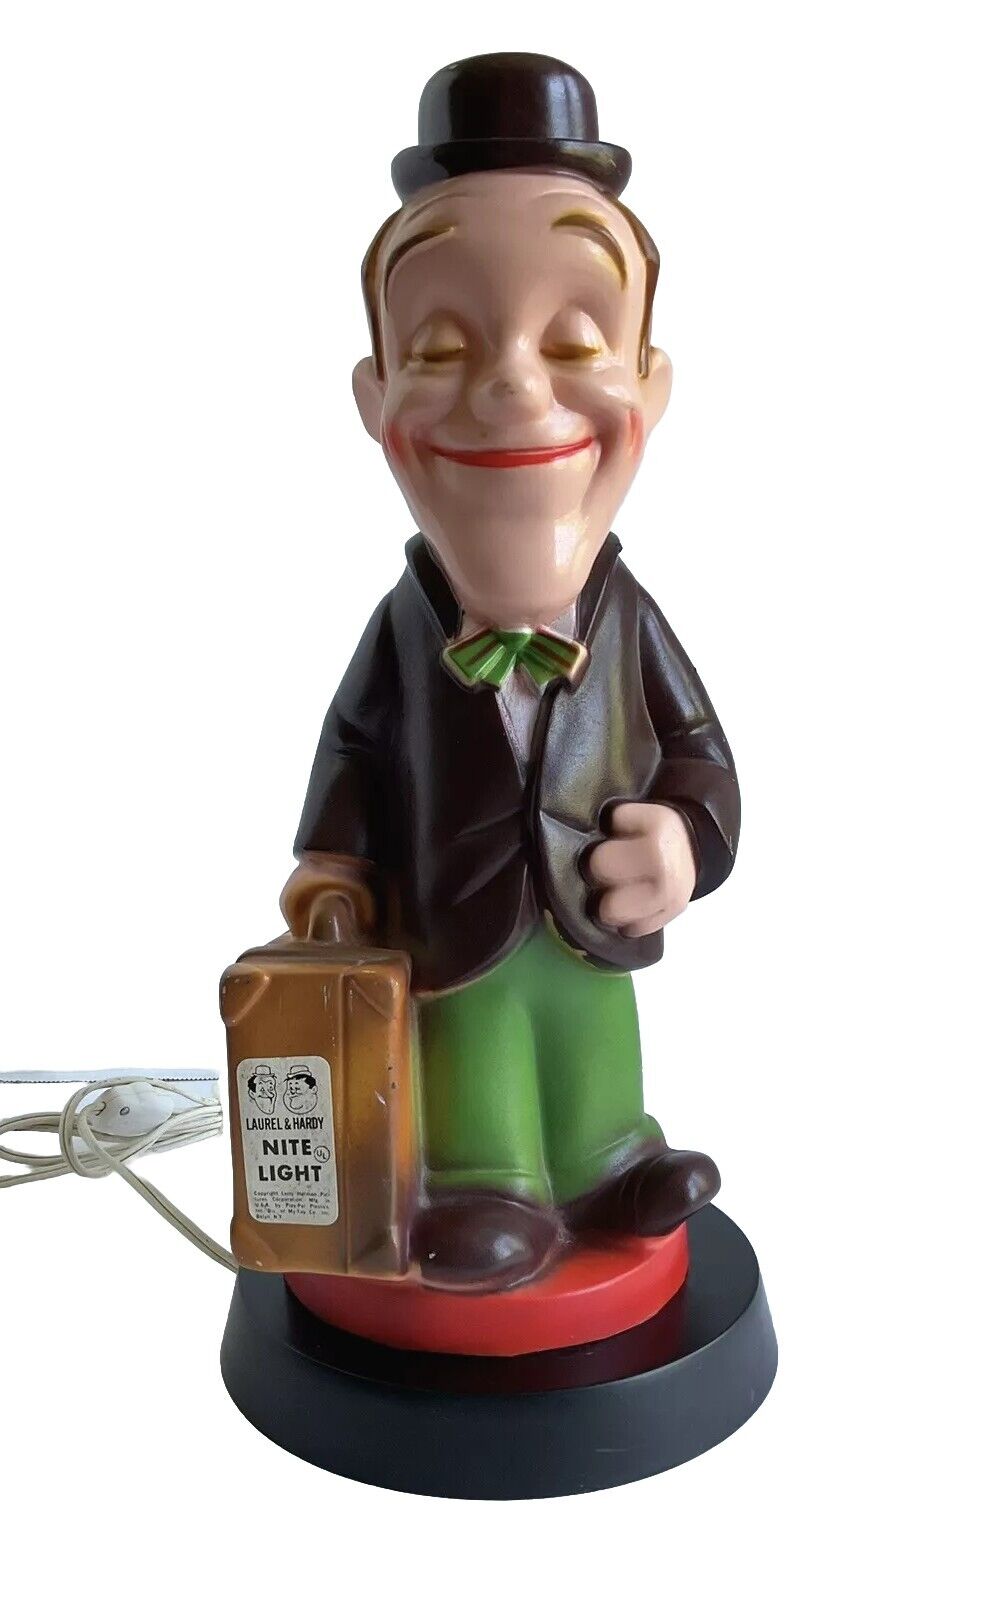 Vintage Laurel & Hardy Lamp Nite Light Play Pal Plastics Collectible Made in USA